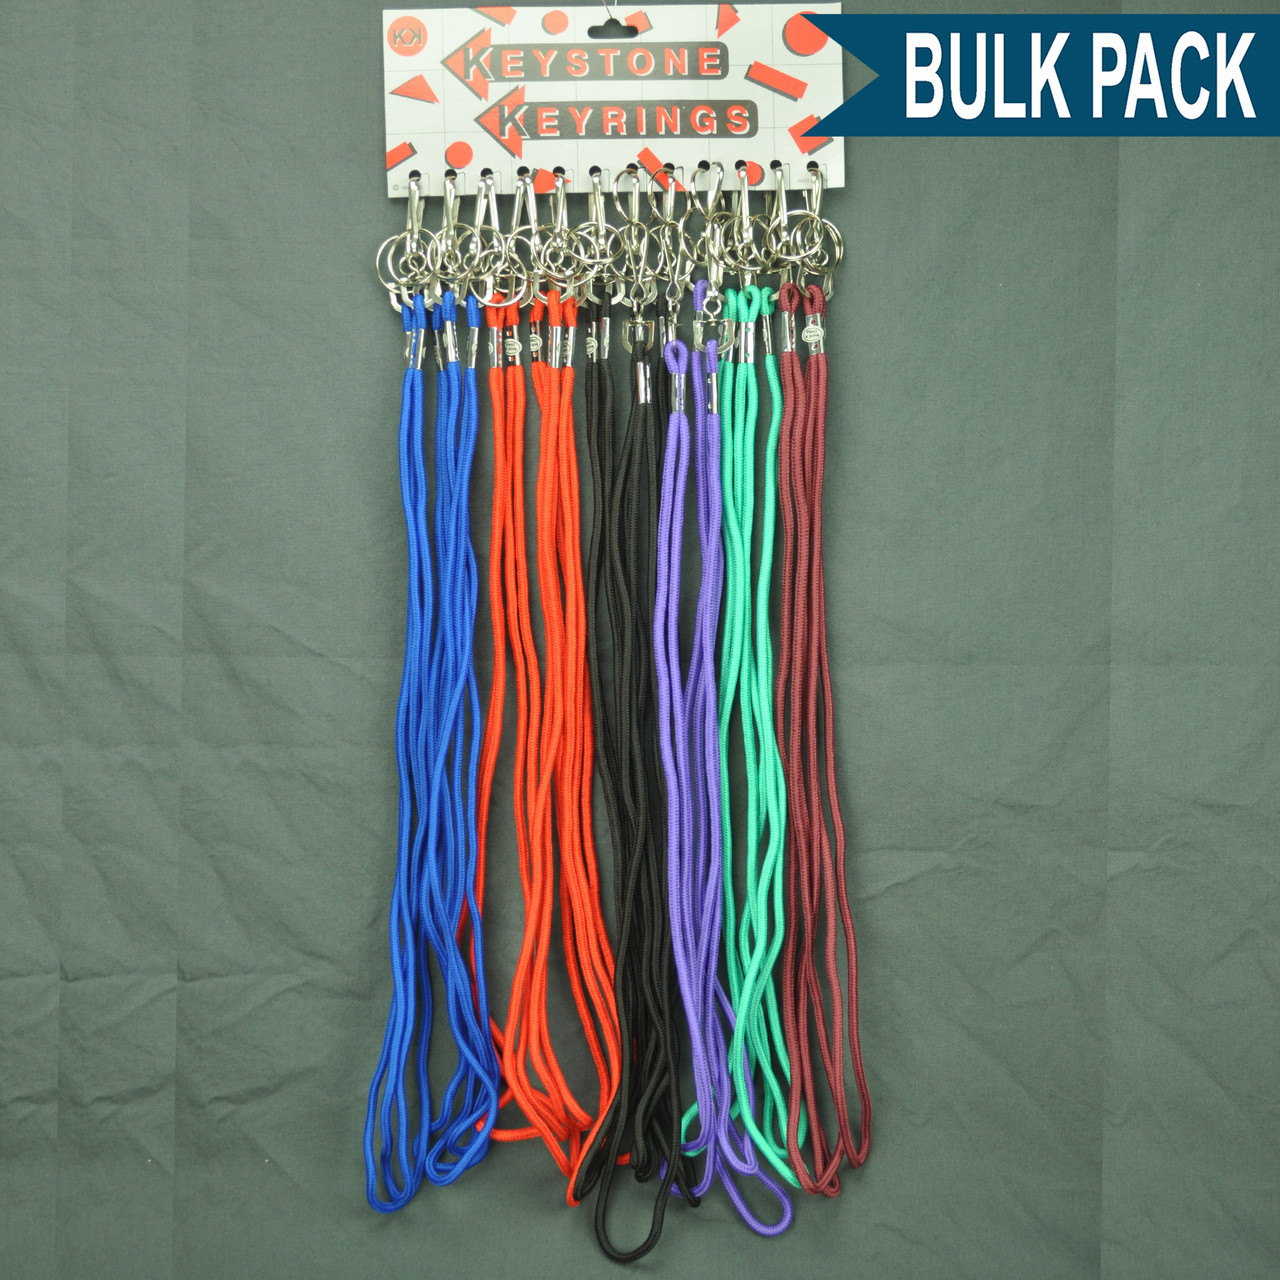 Shop for and Buy Lanyard Neck String Key Holder with Split Ring - Bulk Pack  24 PACK at . Large selection and bulk discounts available.